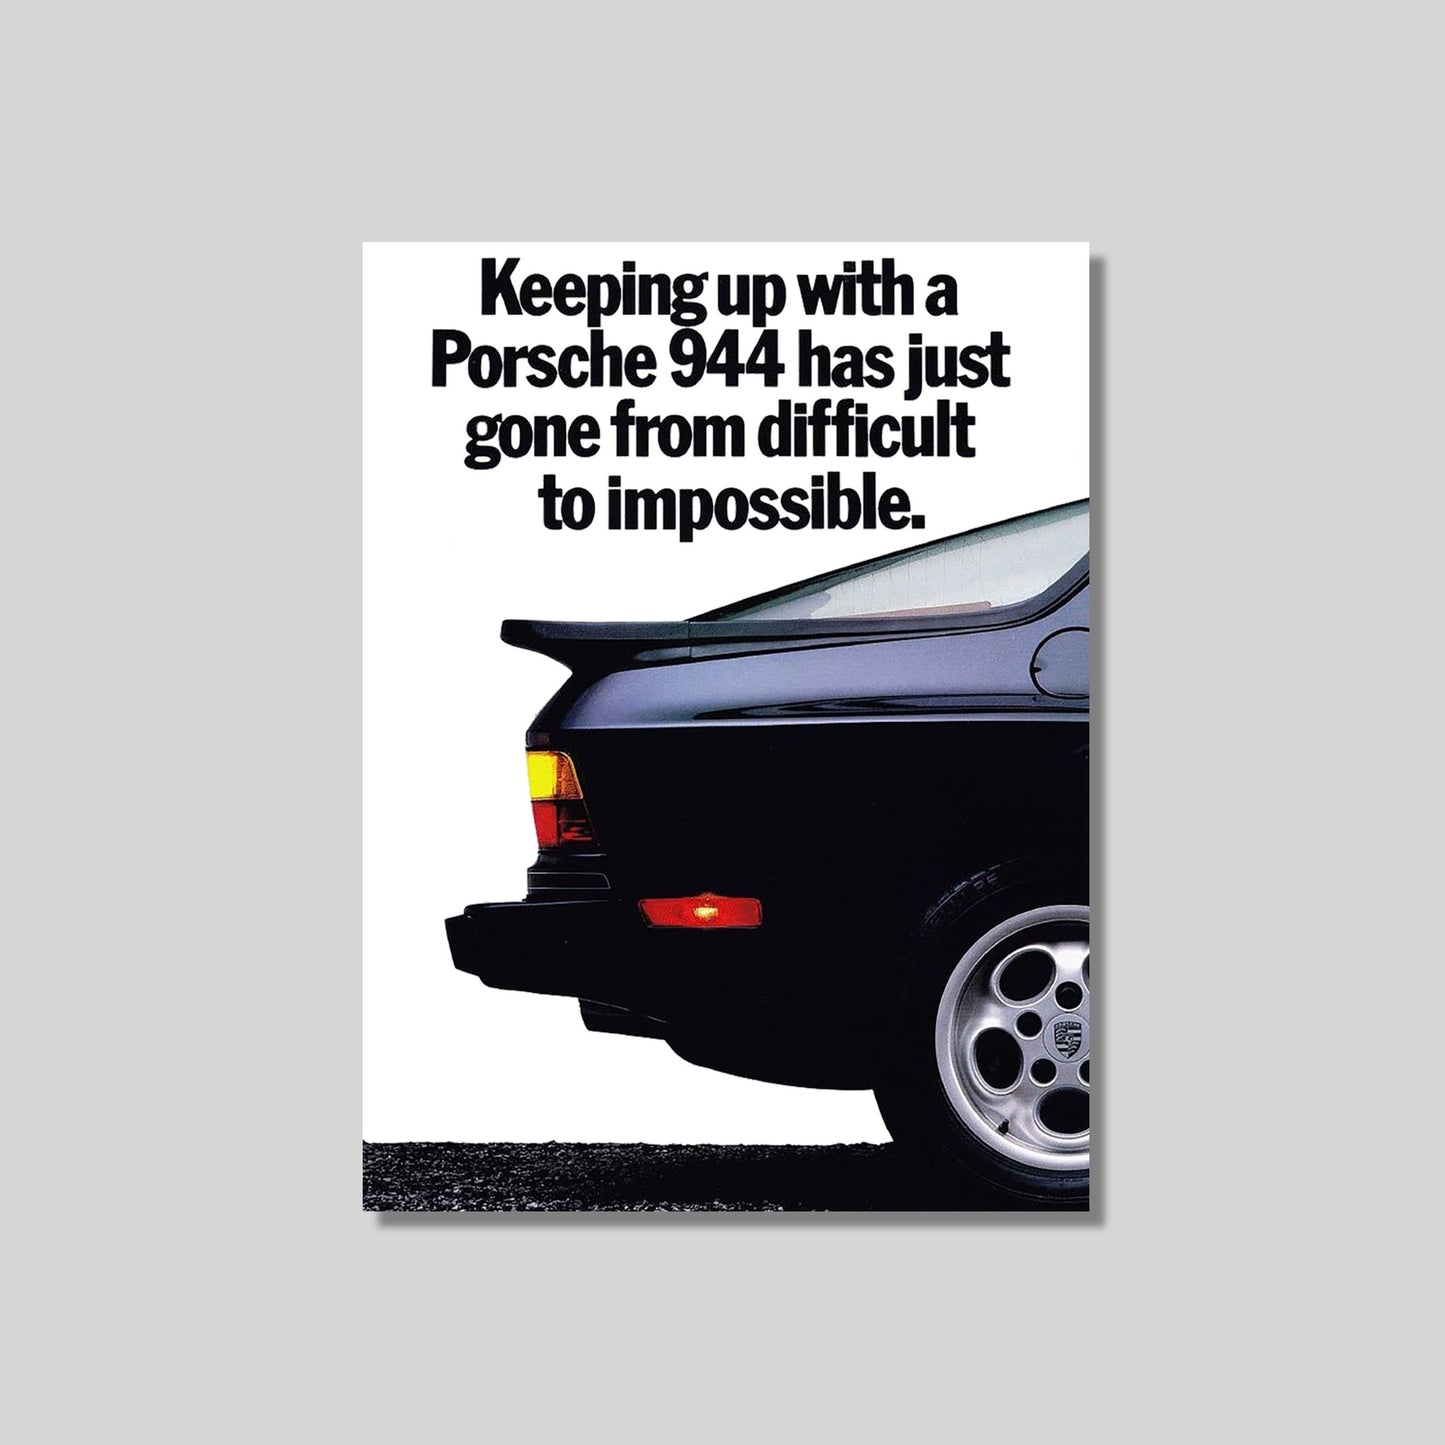 Porsche 944 Classic Car ad Poster – "From Difficult to Impossible"